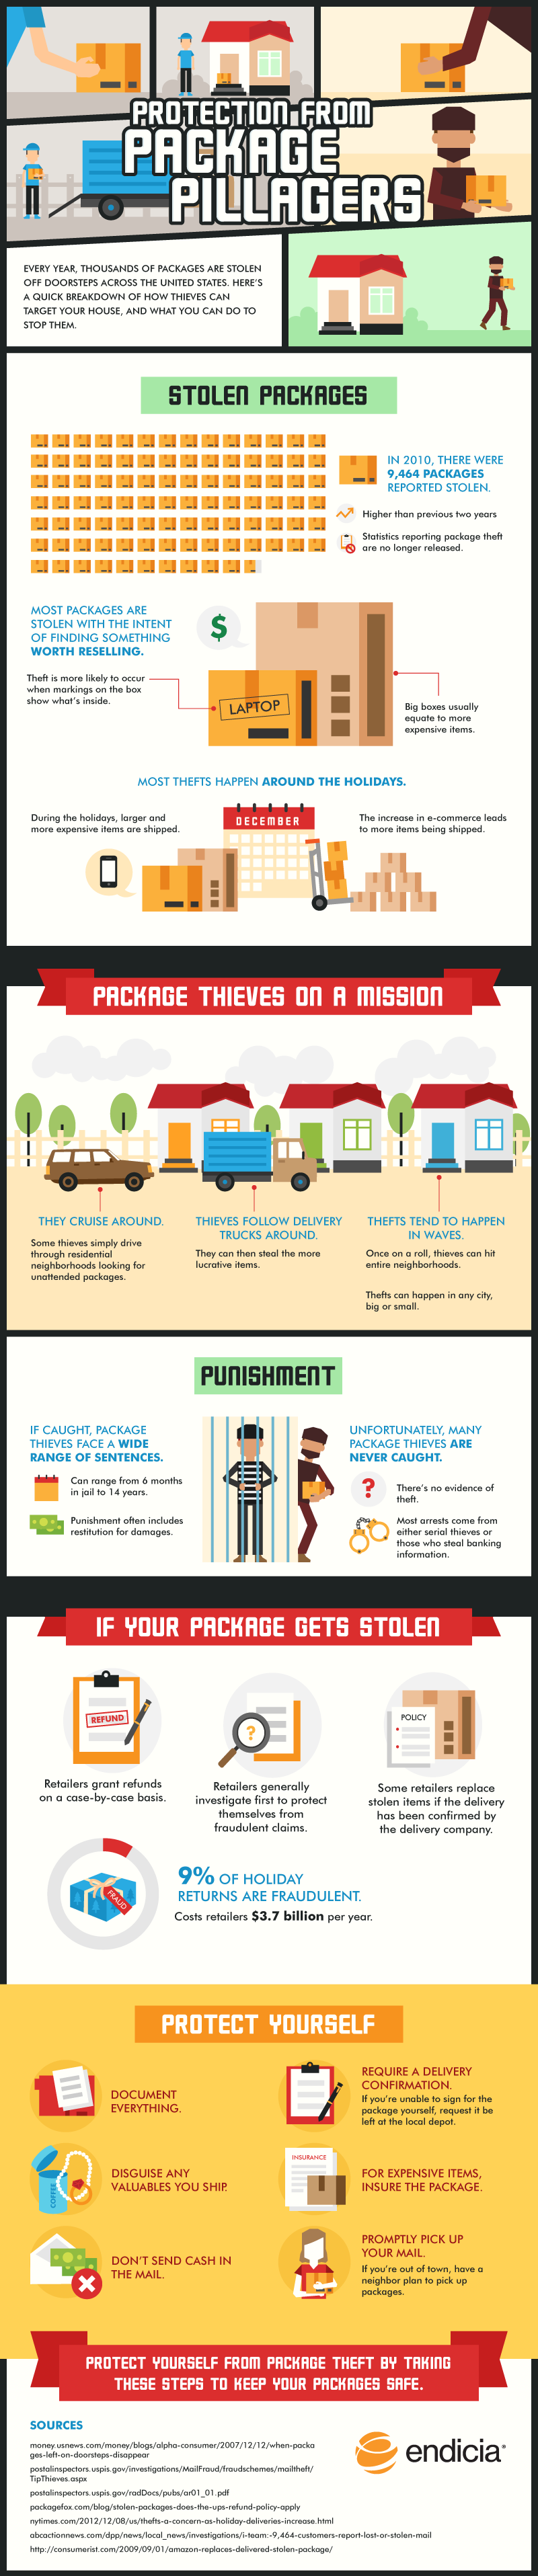 infographic-protect-package-thieves